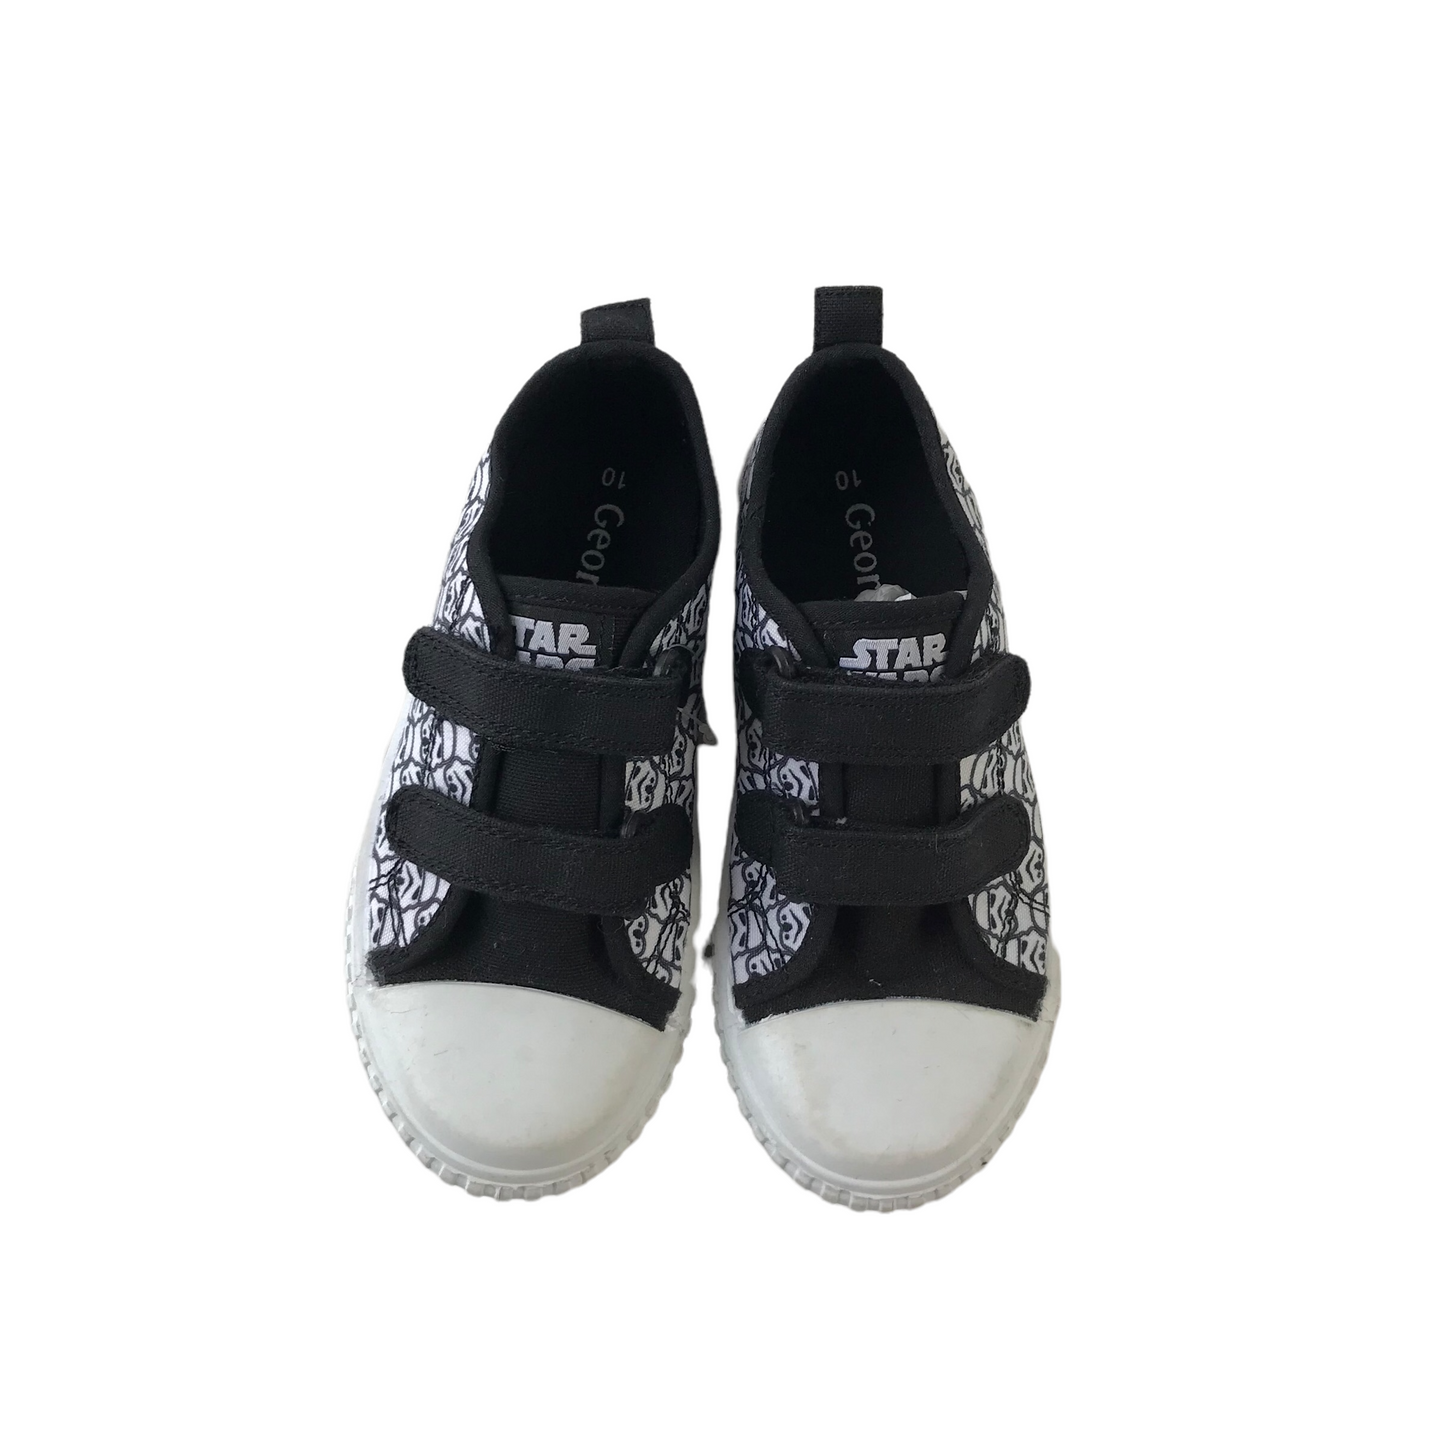 George Black and White Star Wars Trainers Size UK 10 junior